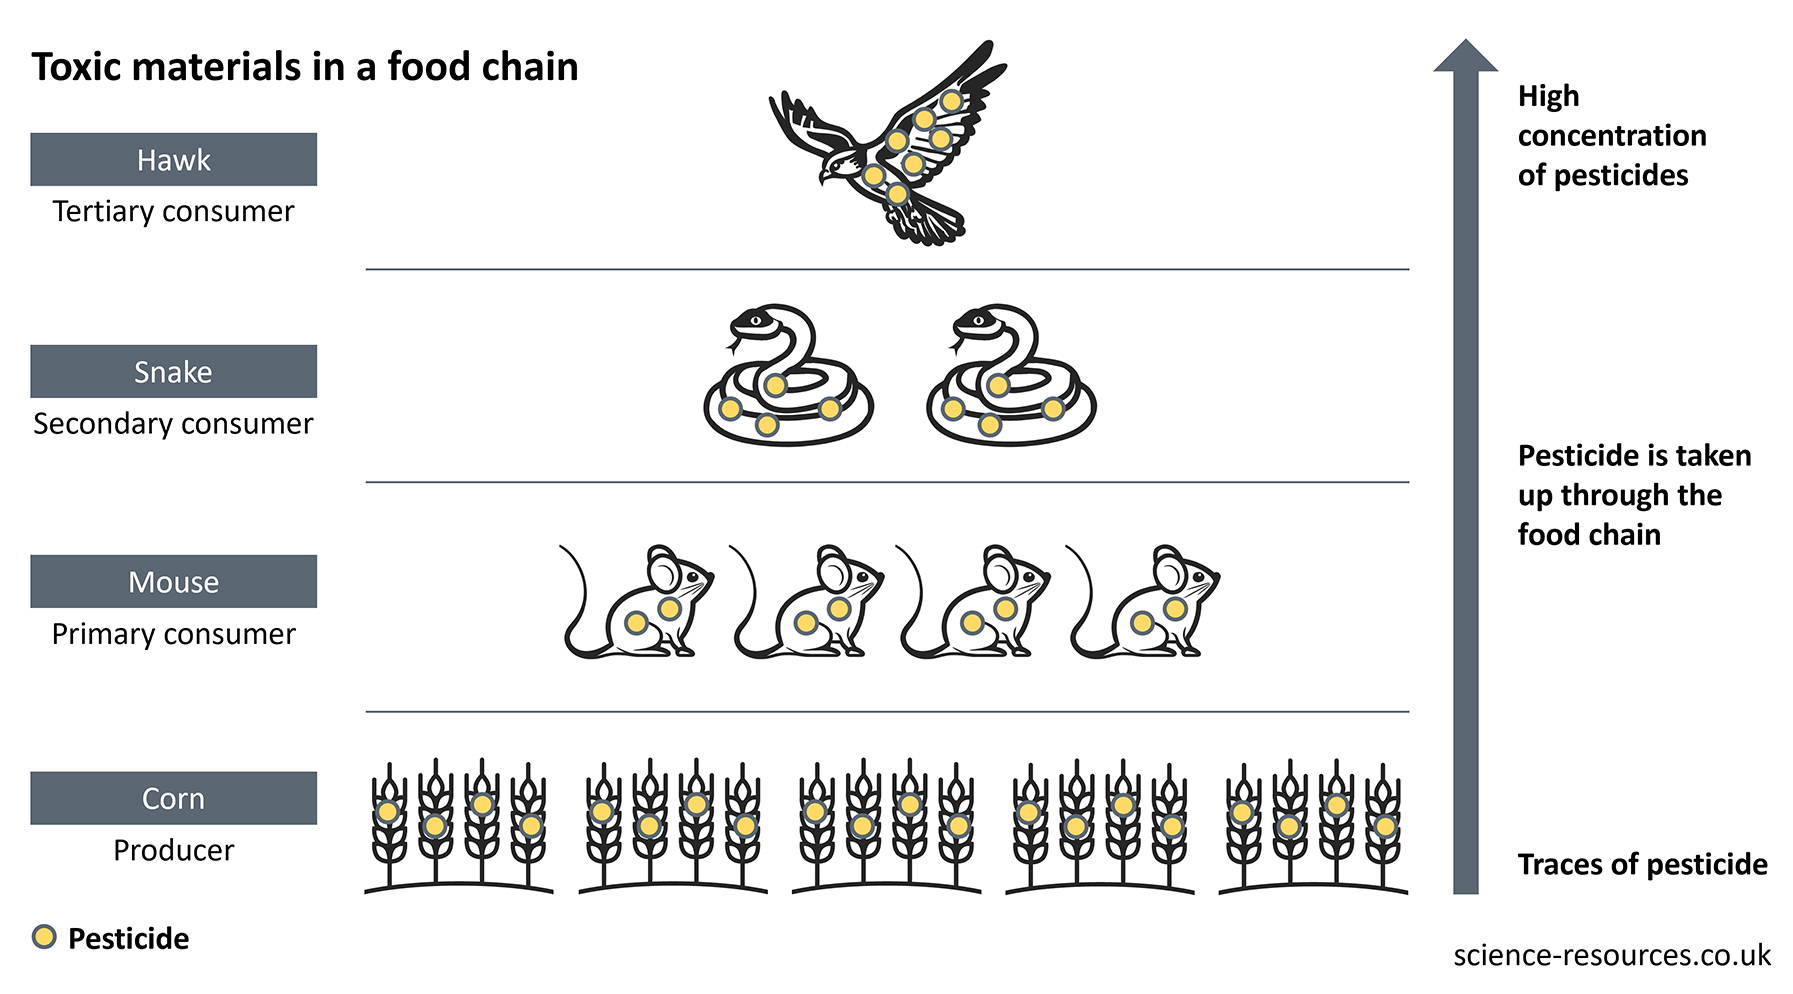 This image is a diagram illustrating the accumulation of toxic materials, specifically pesticides, in a food chain. It shows how pesticides used on corn can move up the food chain affecting mice, snakes, and hawks.